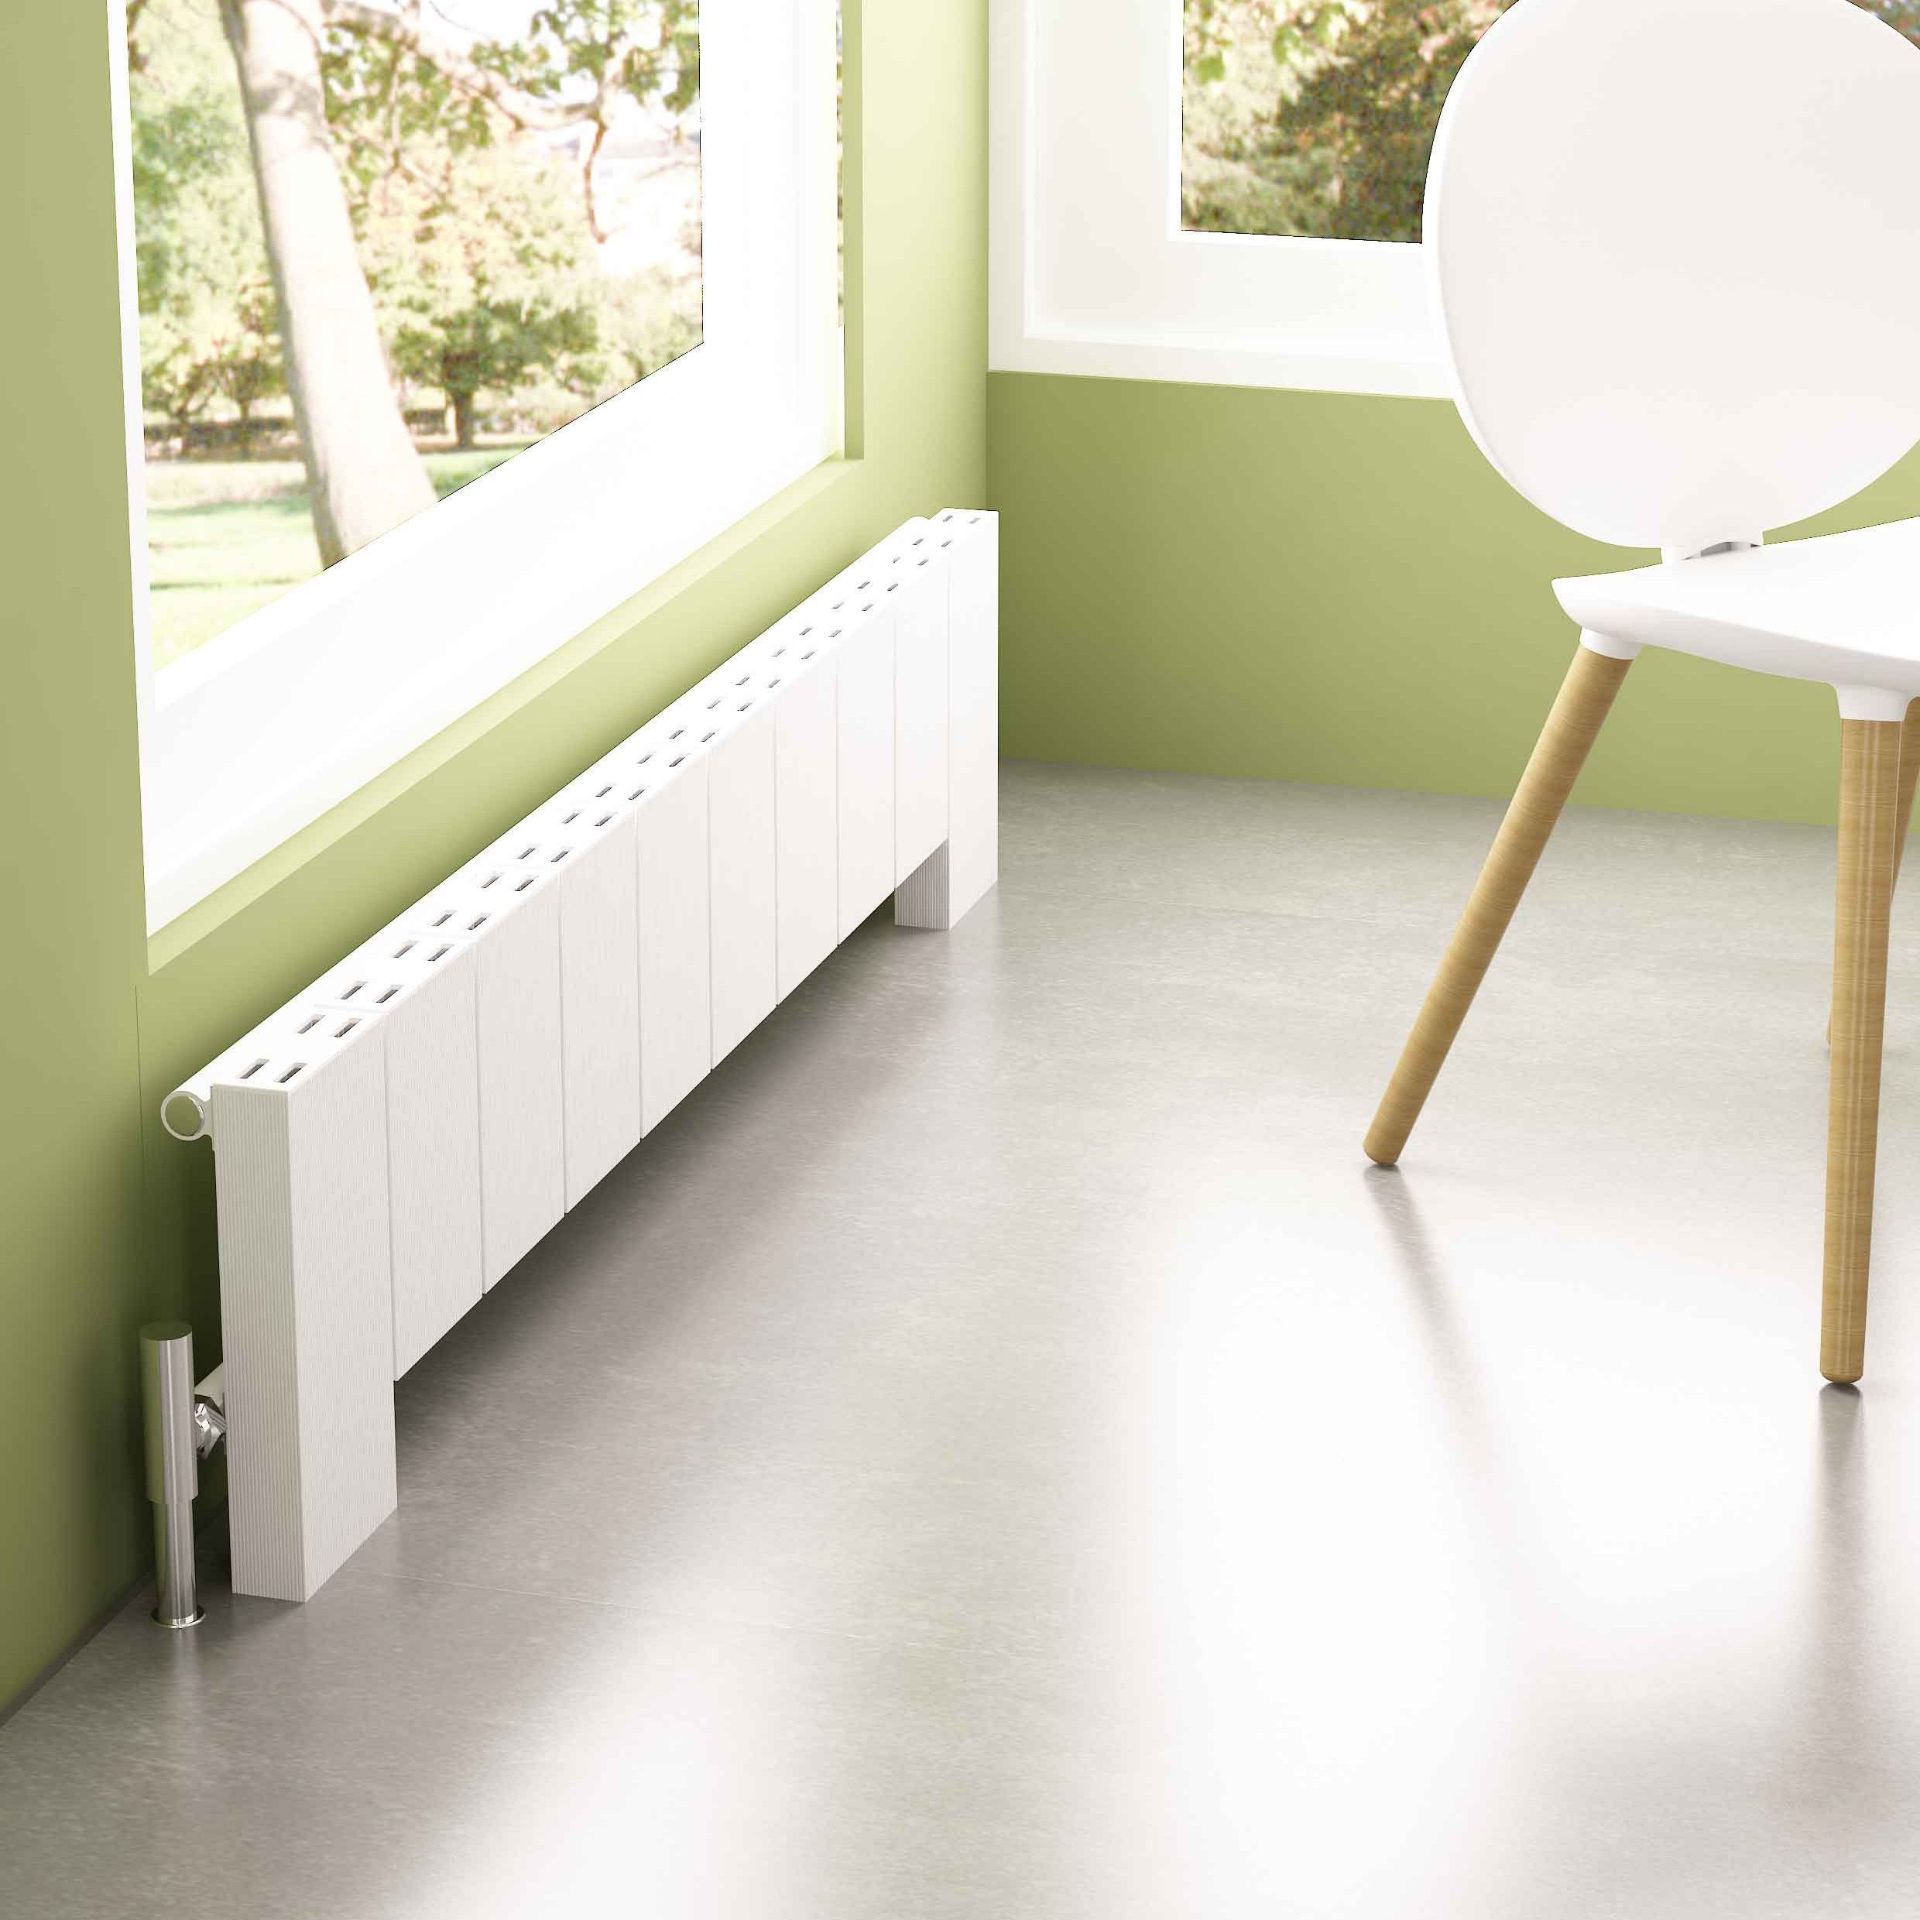 Carisa Elvino Floor radiator, 1245x300mm, comes with wall brackets, Looks to still be factory